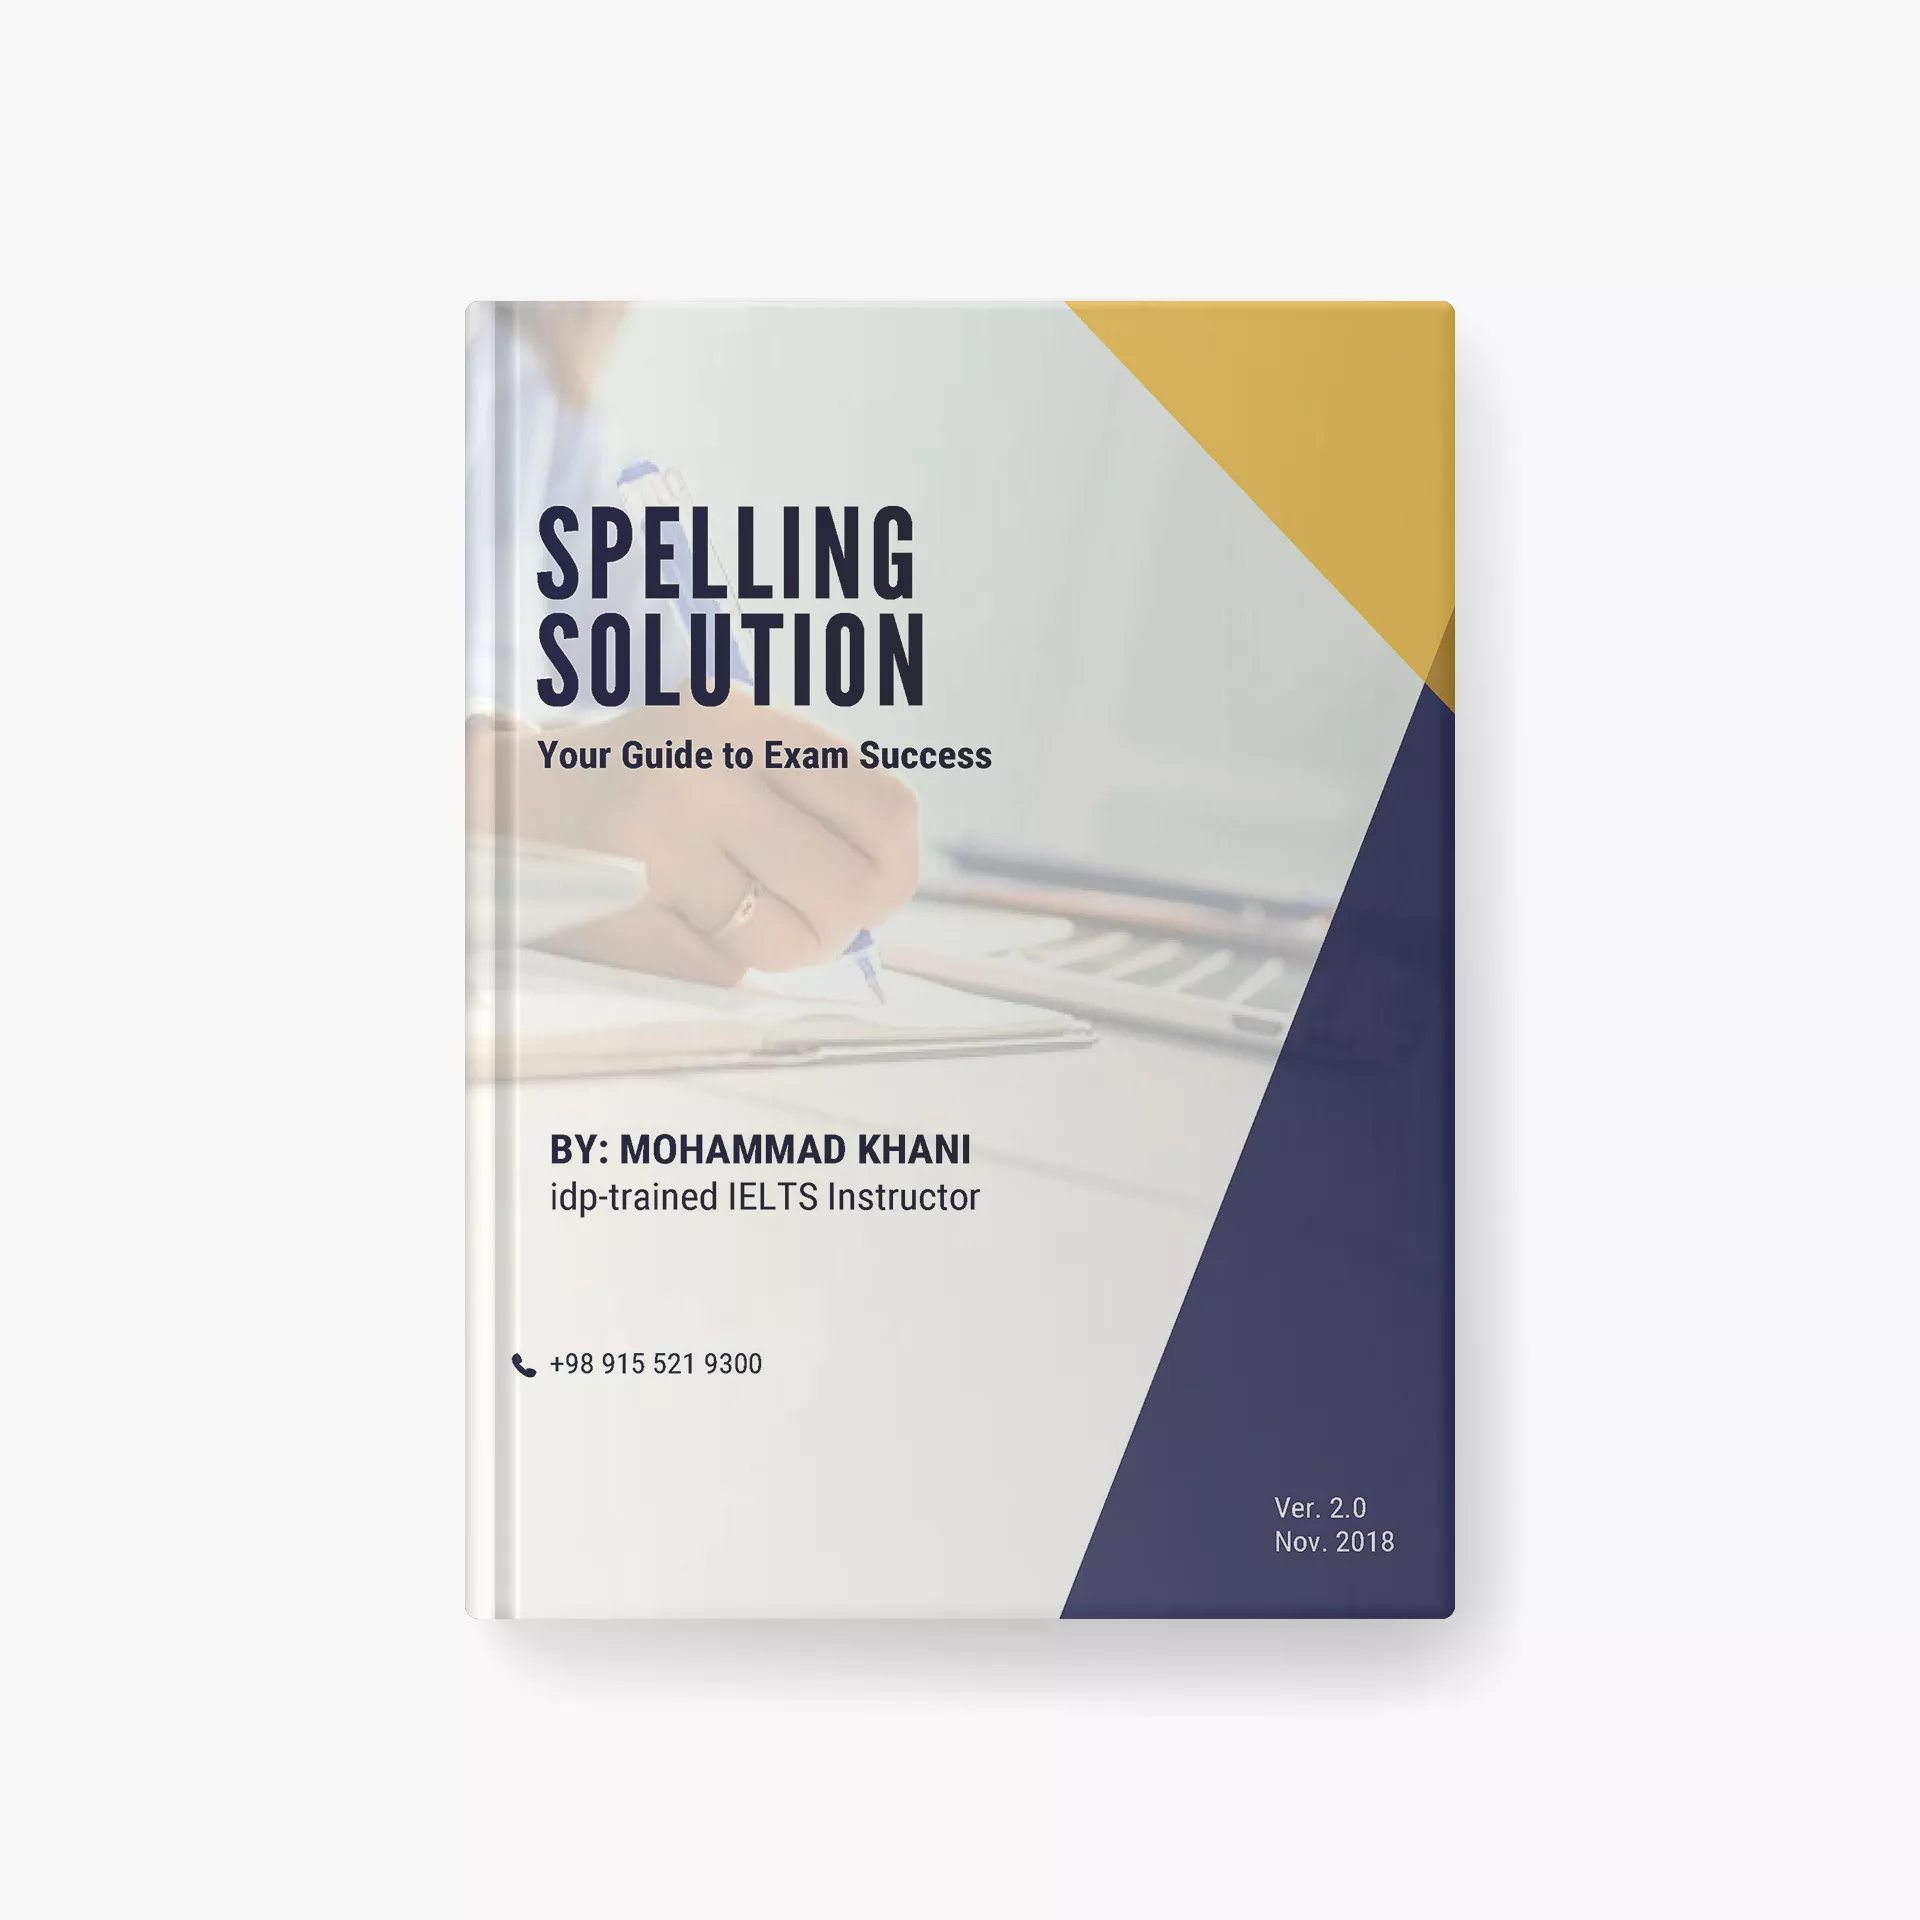 Spelling Solution – Your Guide to Exam Success